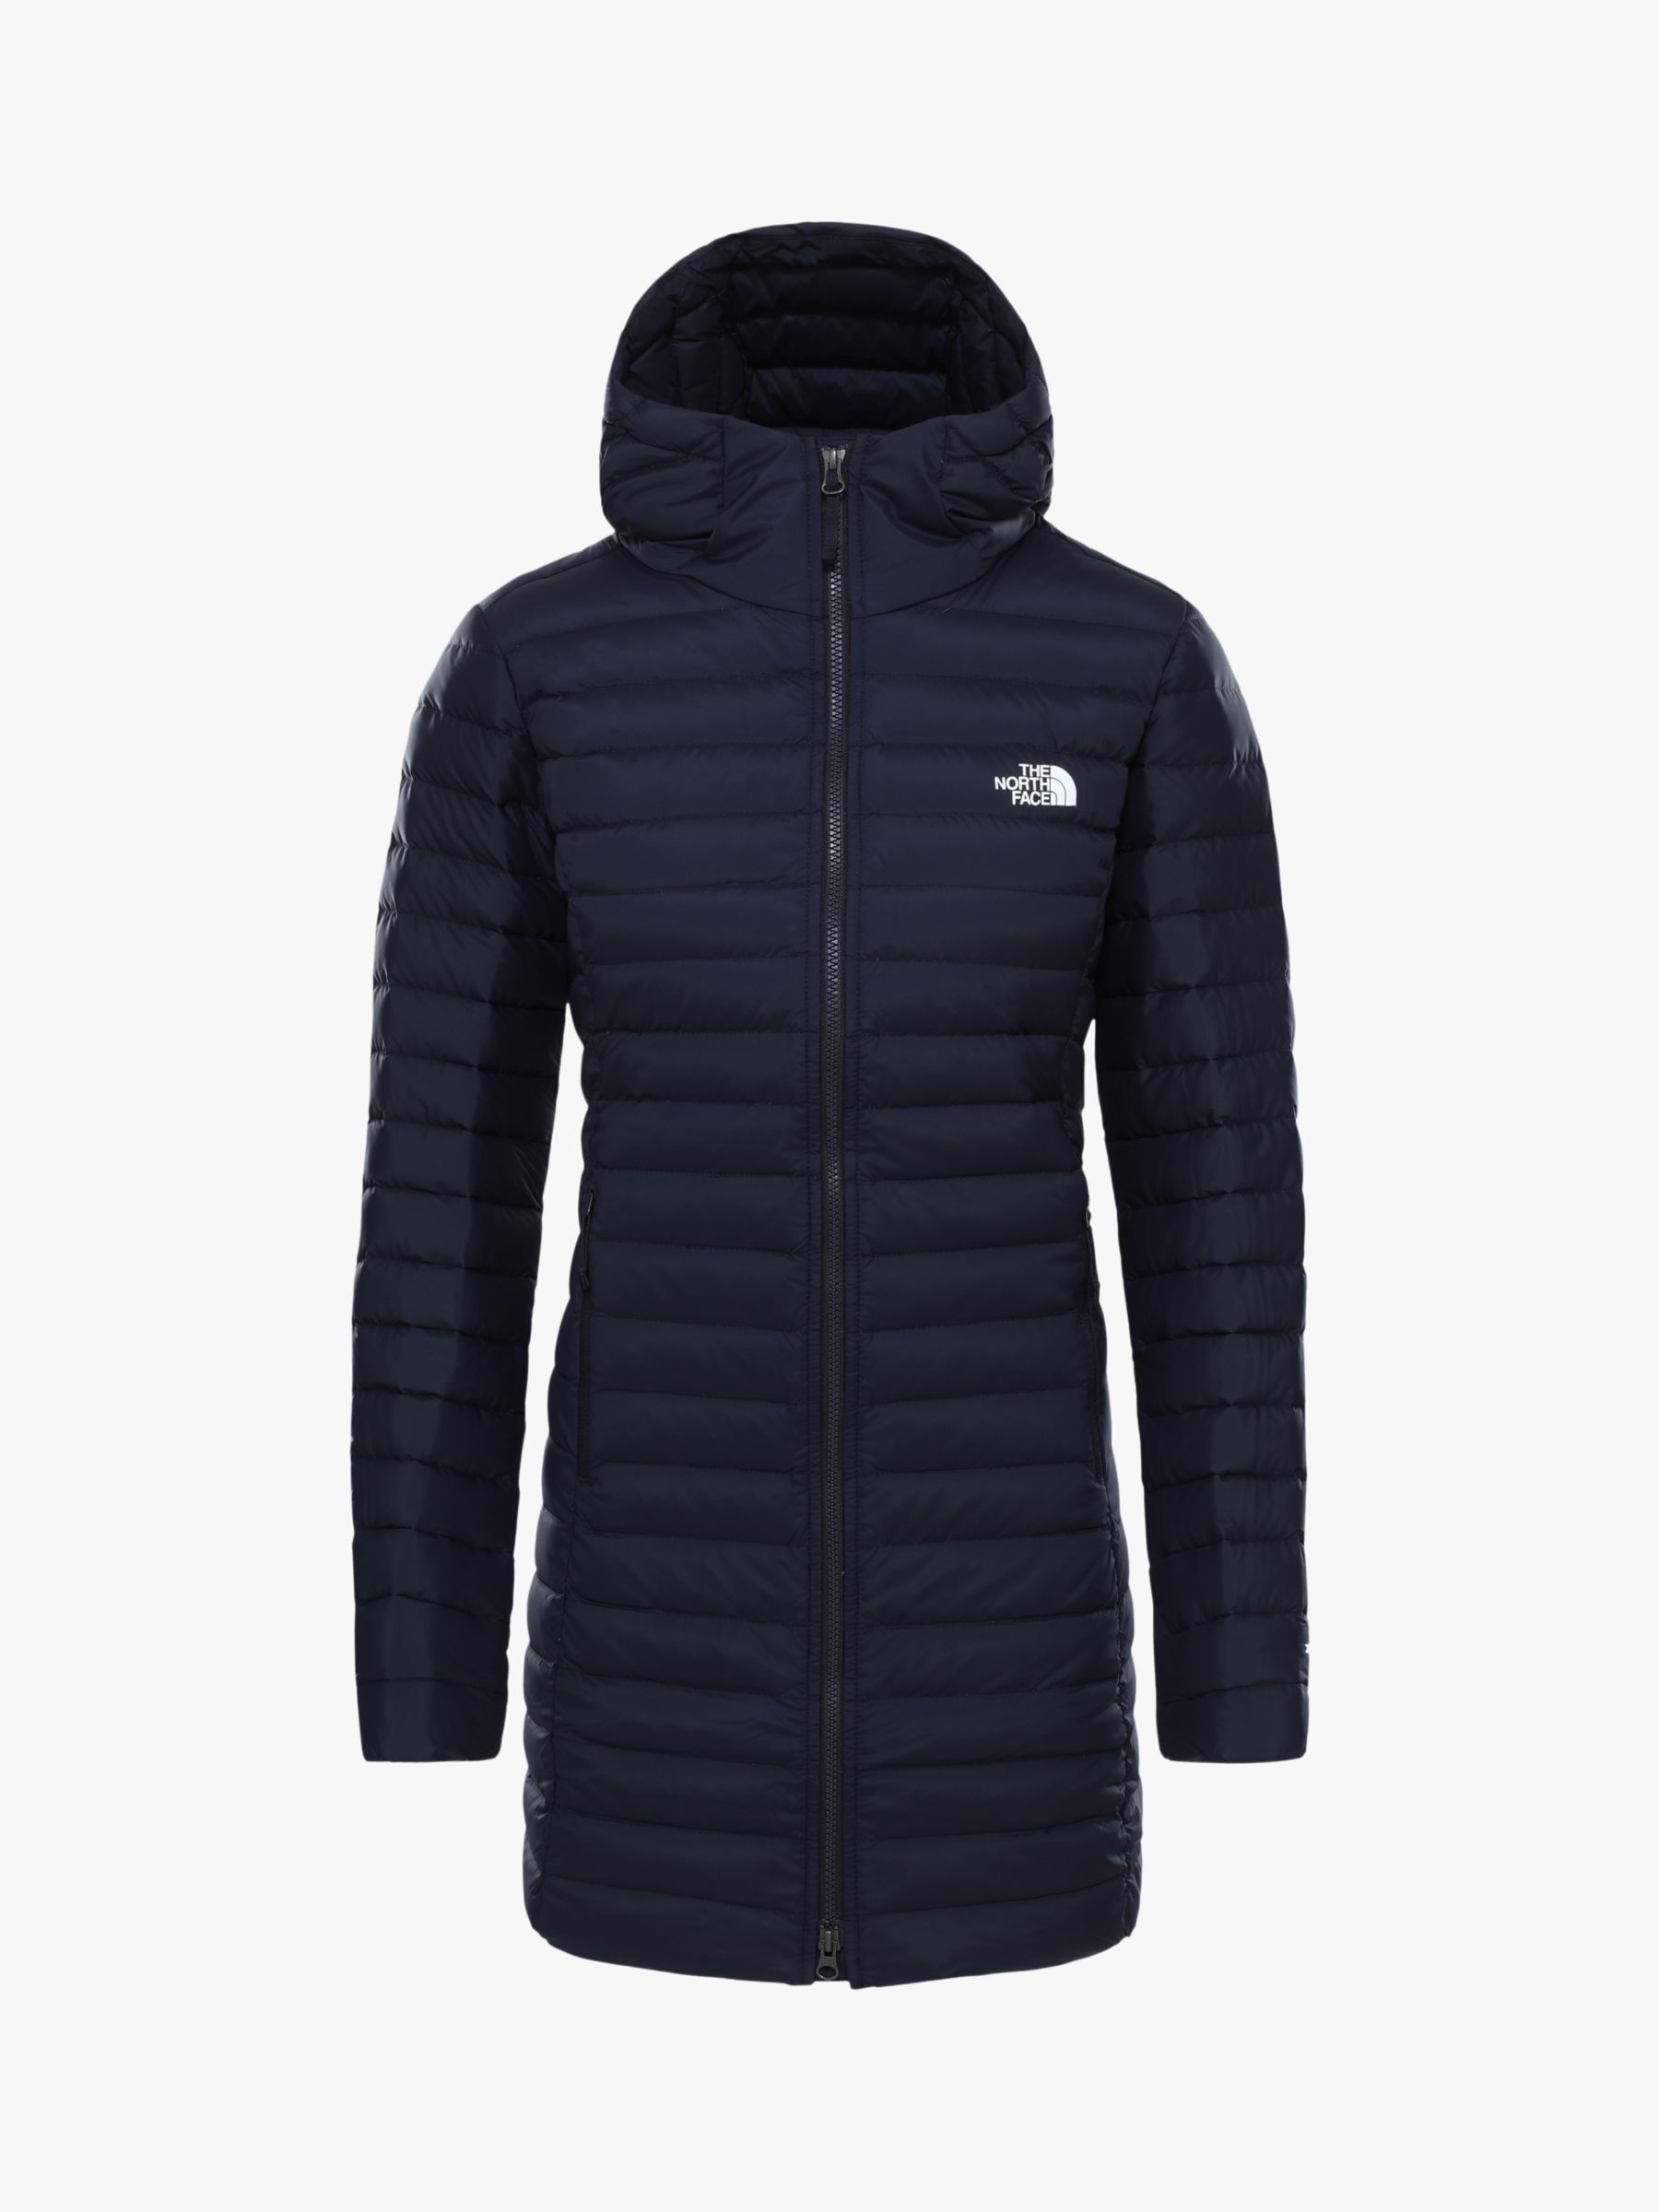 north face women's jacket long